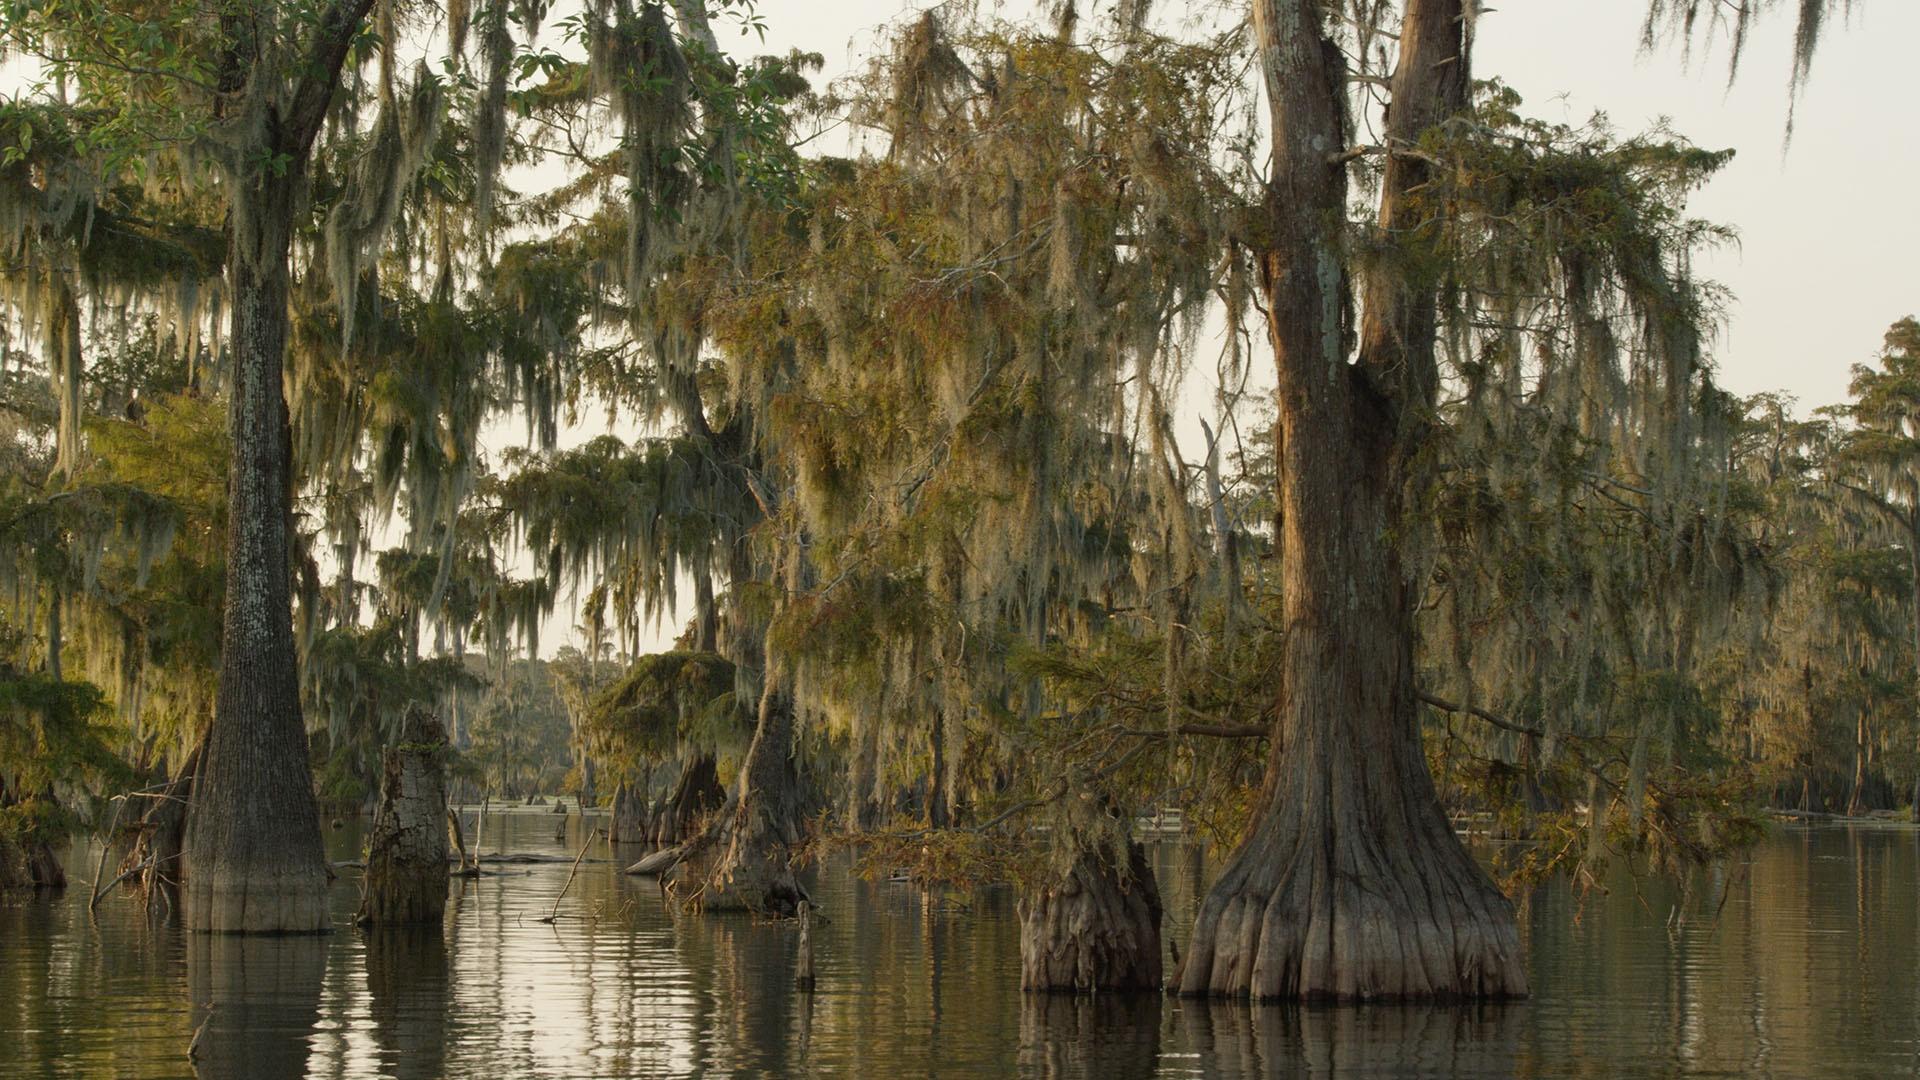 The Atchafalaya Swamp in Louisiana, fed by the Mississippi, is the largest swamp in the USA.